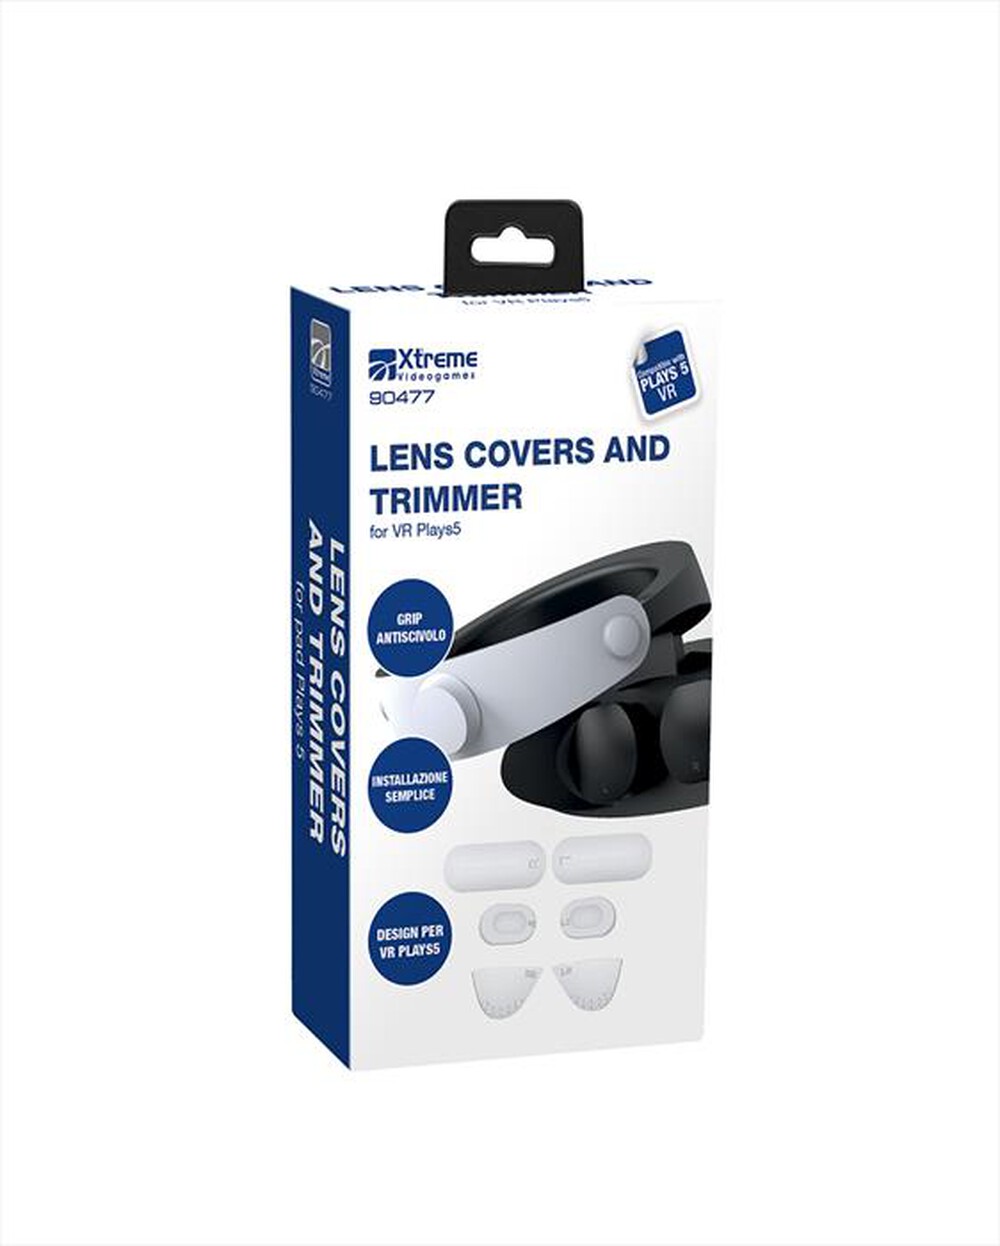 "XTREME - LENS COVERS AND TRIMMER-NERO"